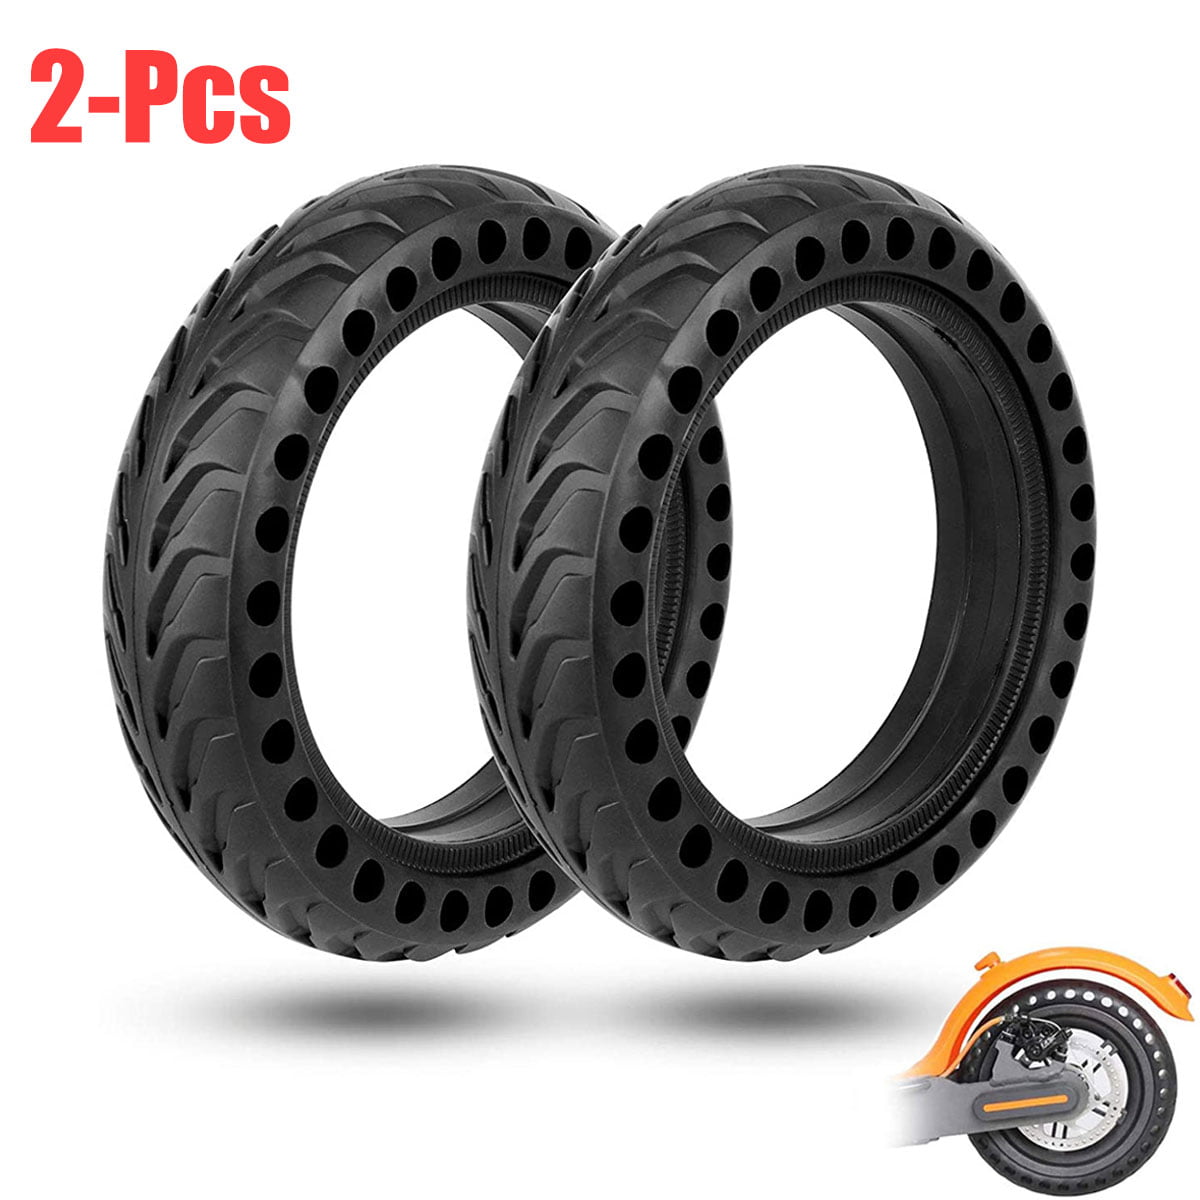 2pcs/set Shock Absorption Solid Tire 8.5" Parts for M365 Electric Scooter Black 